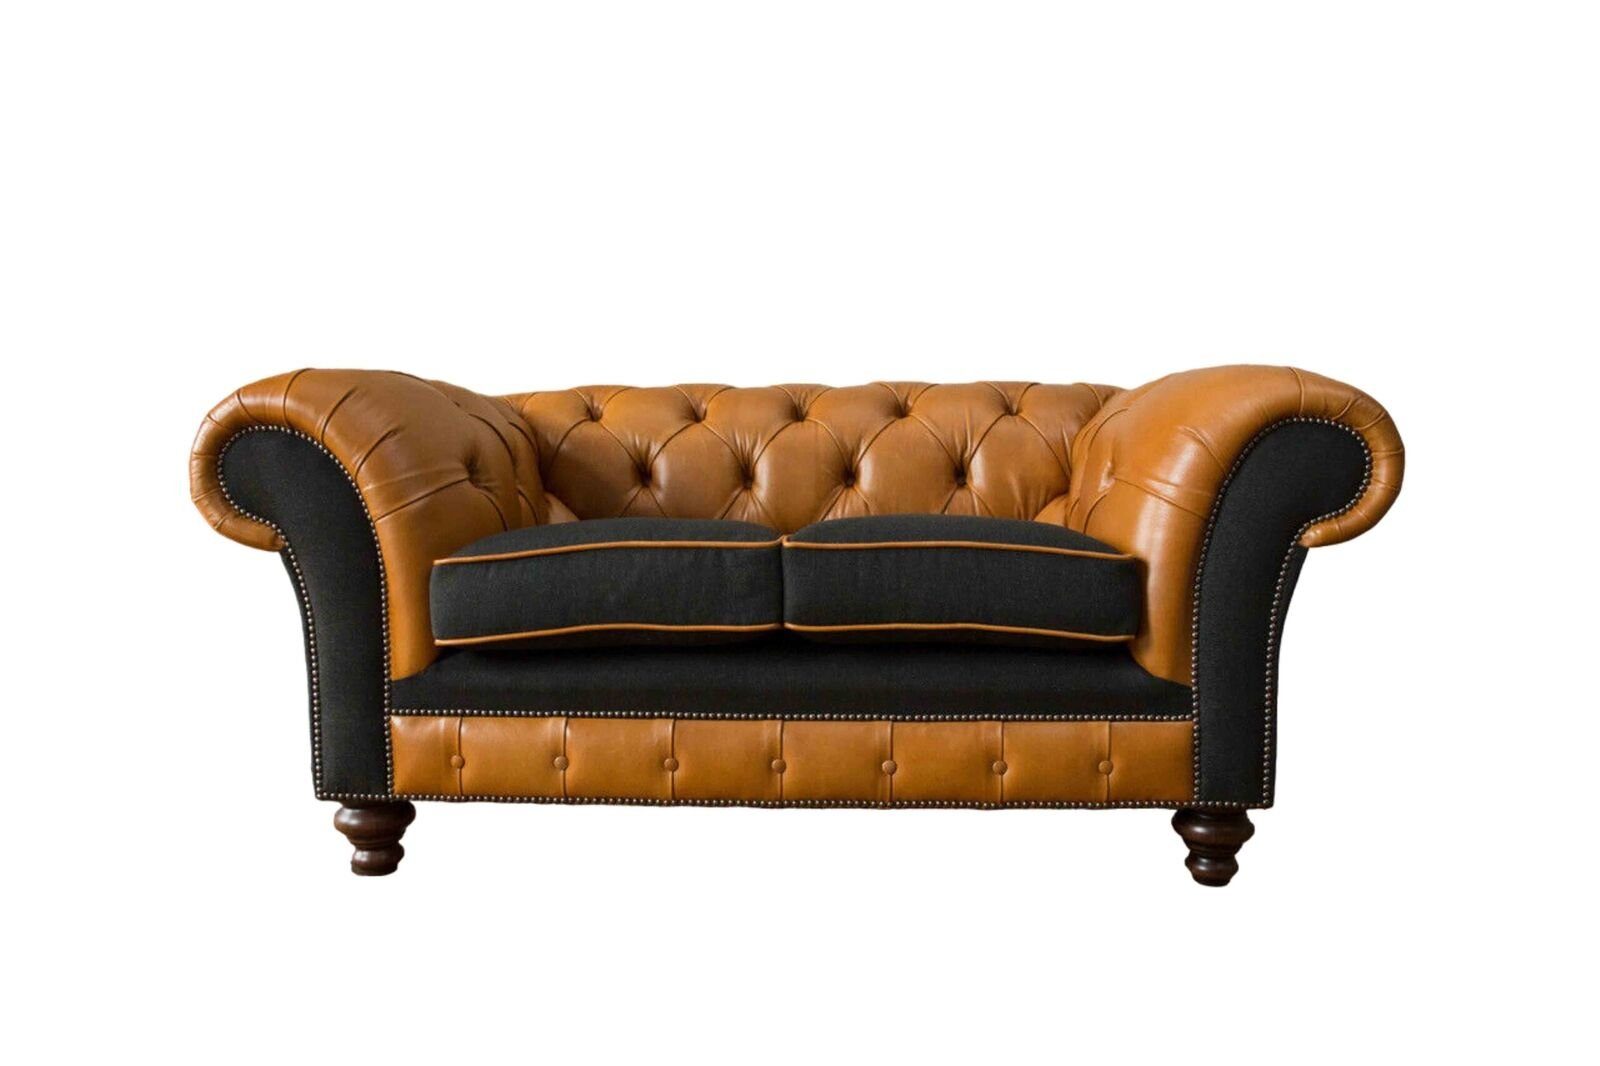 JVmoebel Sofa Chesterfield Ledersofa Sofa Couch Polster 2 Sitzer Textil Sofas, Made In Europe